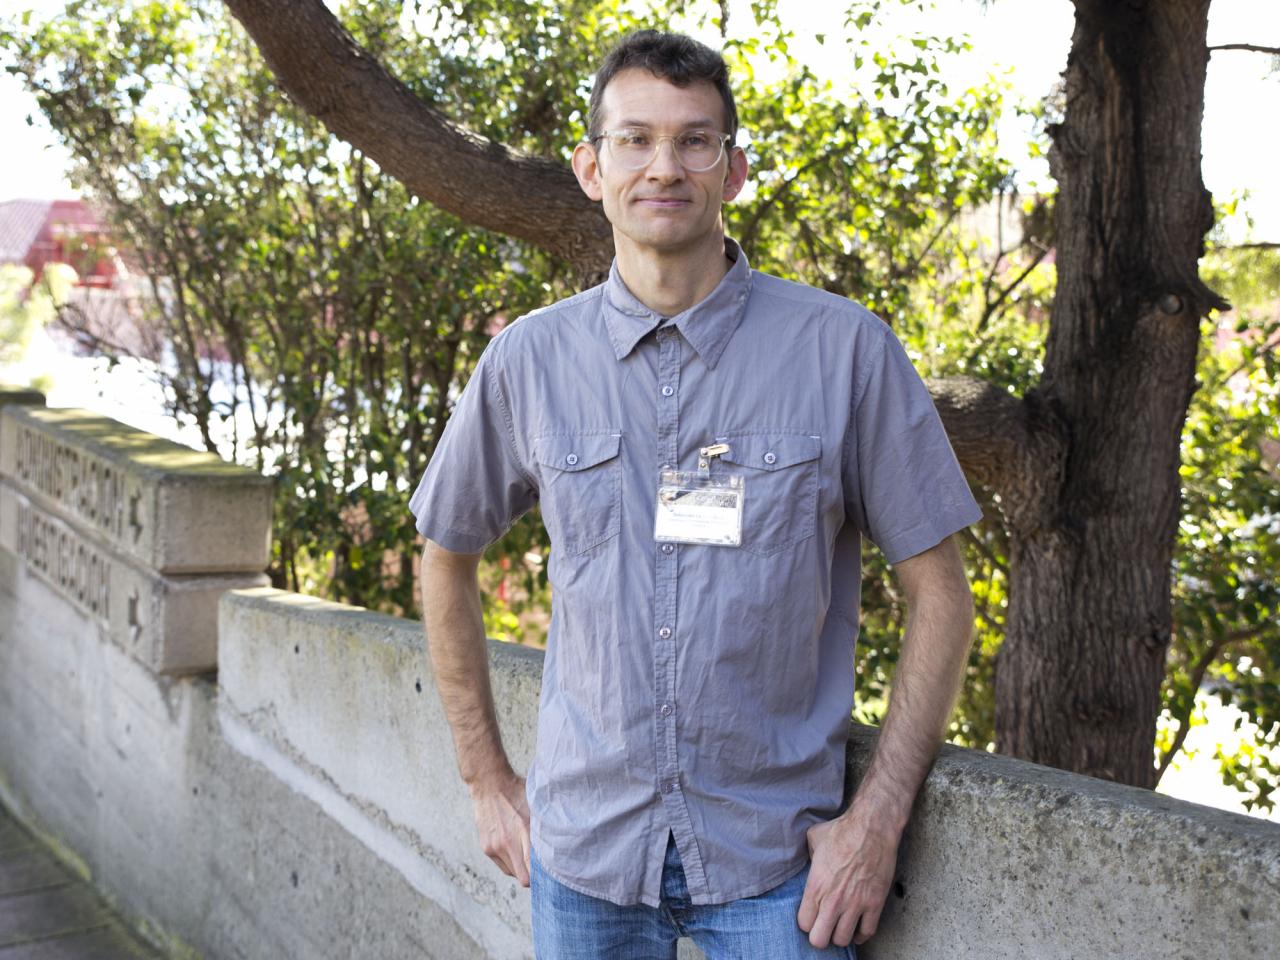 Sebastien Lebonnois, researcher at the Laboratory of Dynamical Meteorology in the National Centre for Scientific Research (CNRS) expert in planetary atmospheres. He is the first lecturer at the XXVIII Canary Island Winter School of Astrophysics. Credit: E